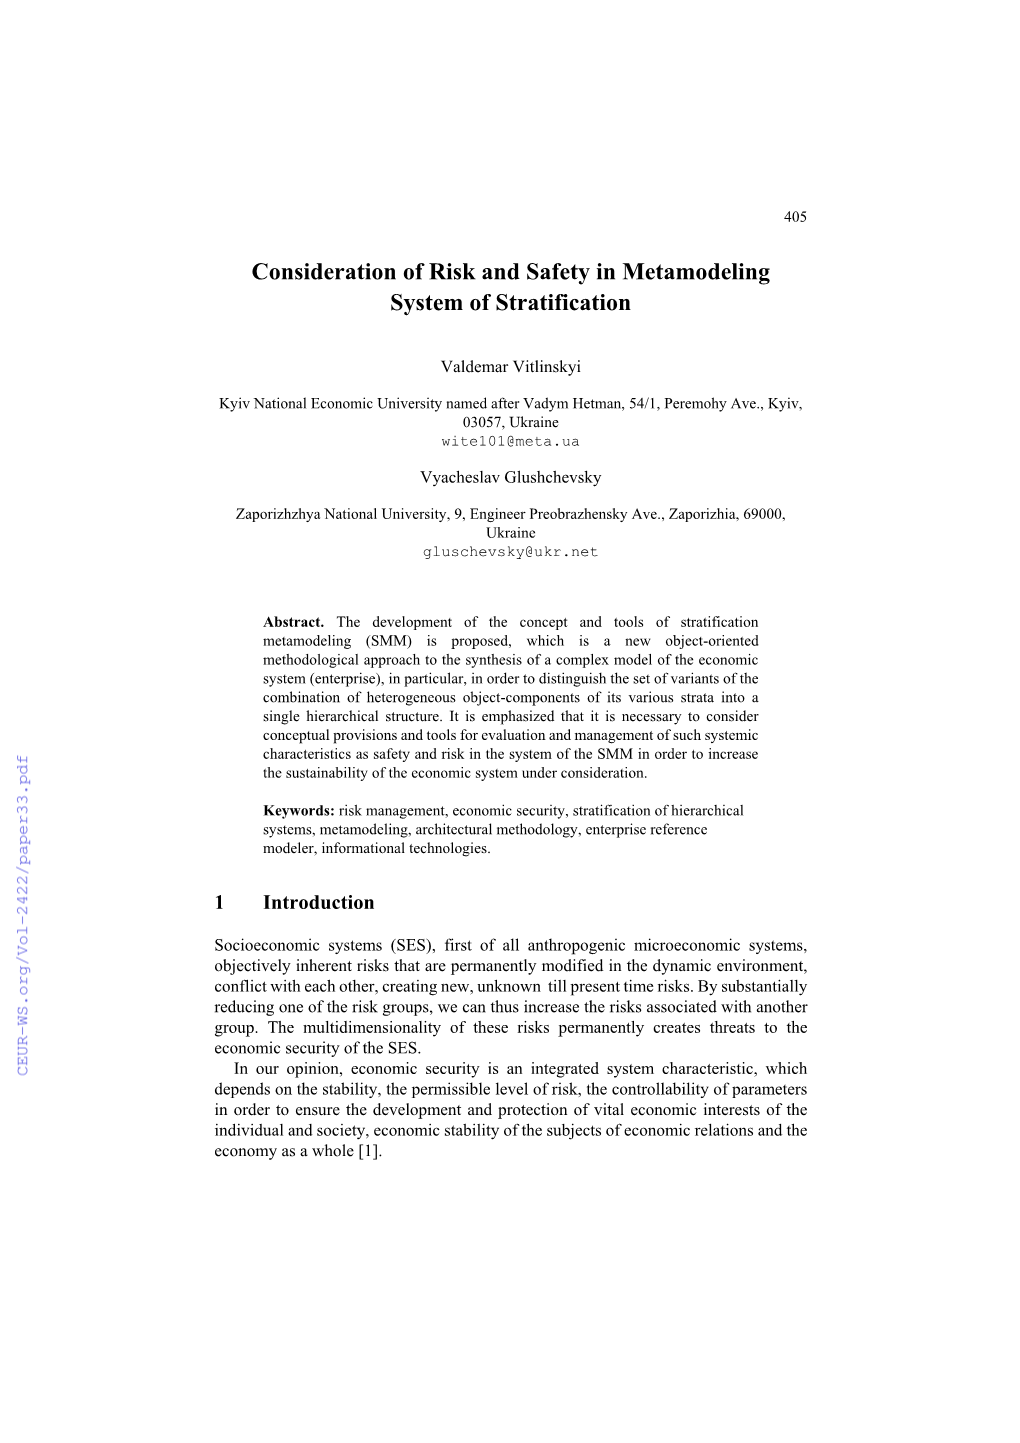 Consideration of Risk and Safety in Metamodeling System of Stratification